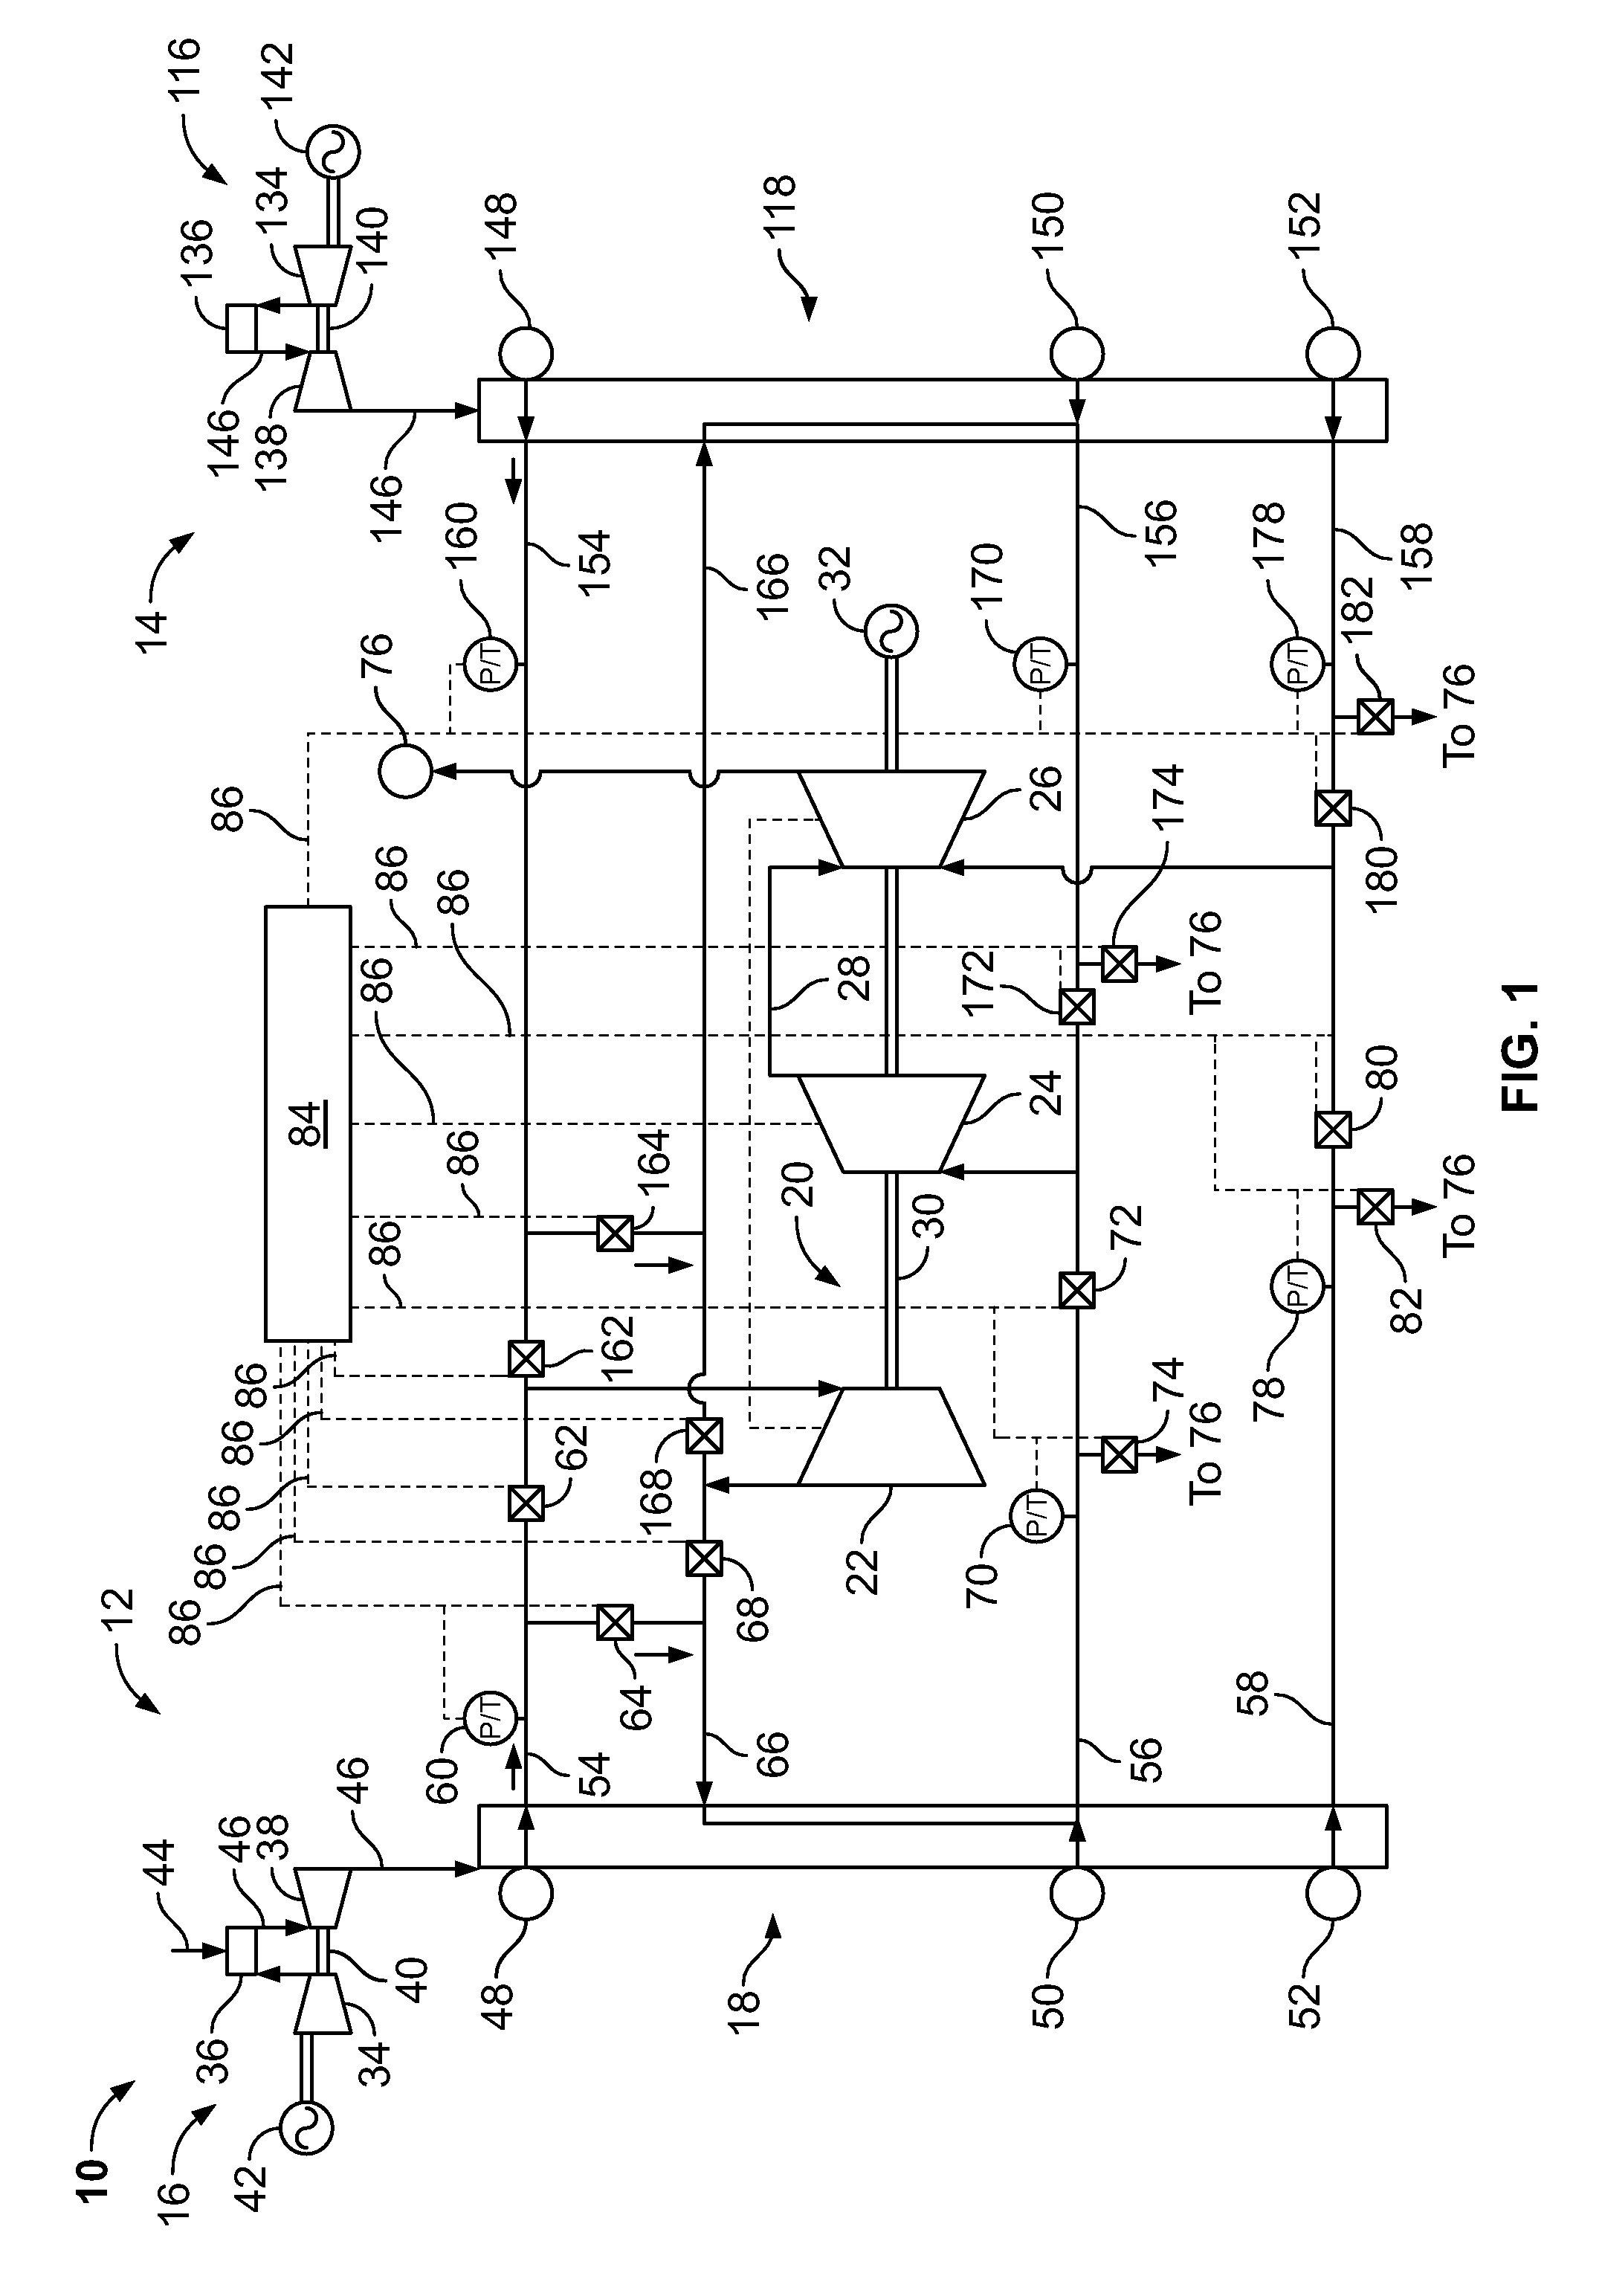 Systems and methods for channeling steam into turbines